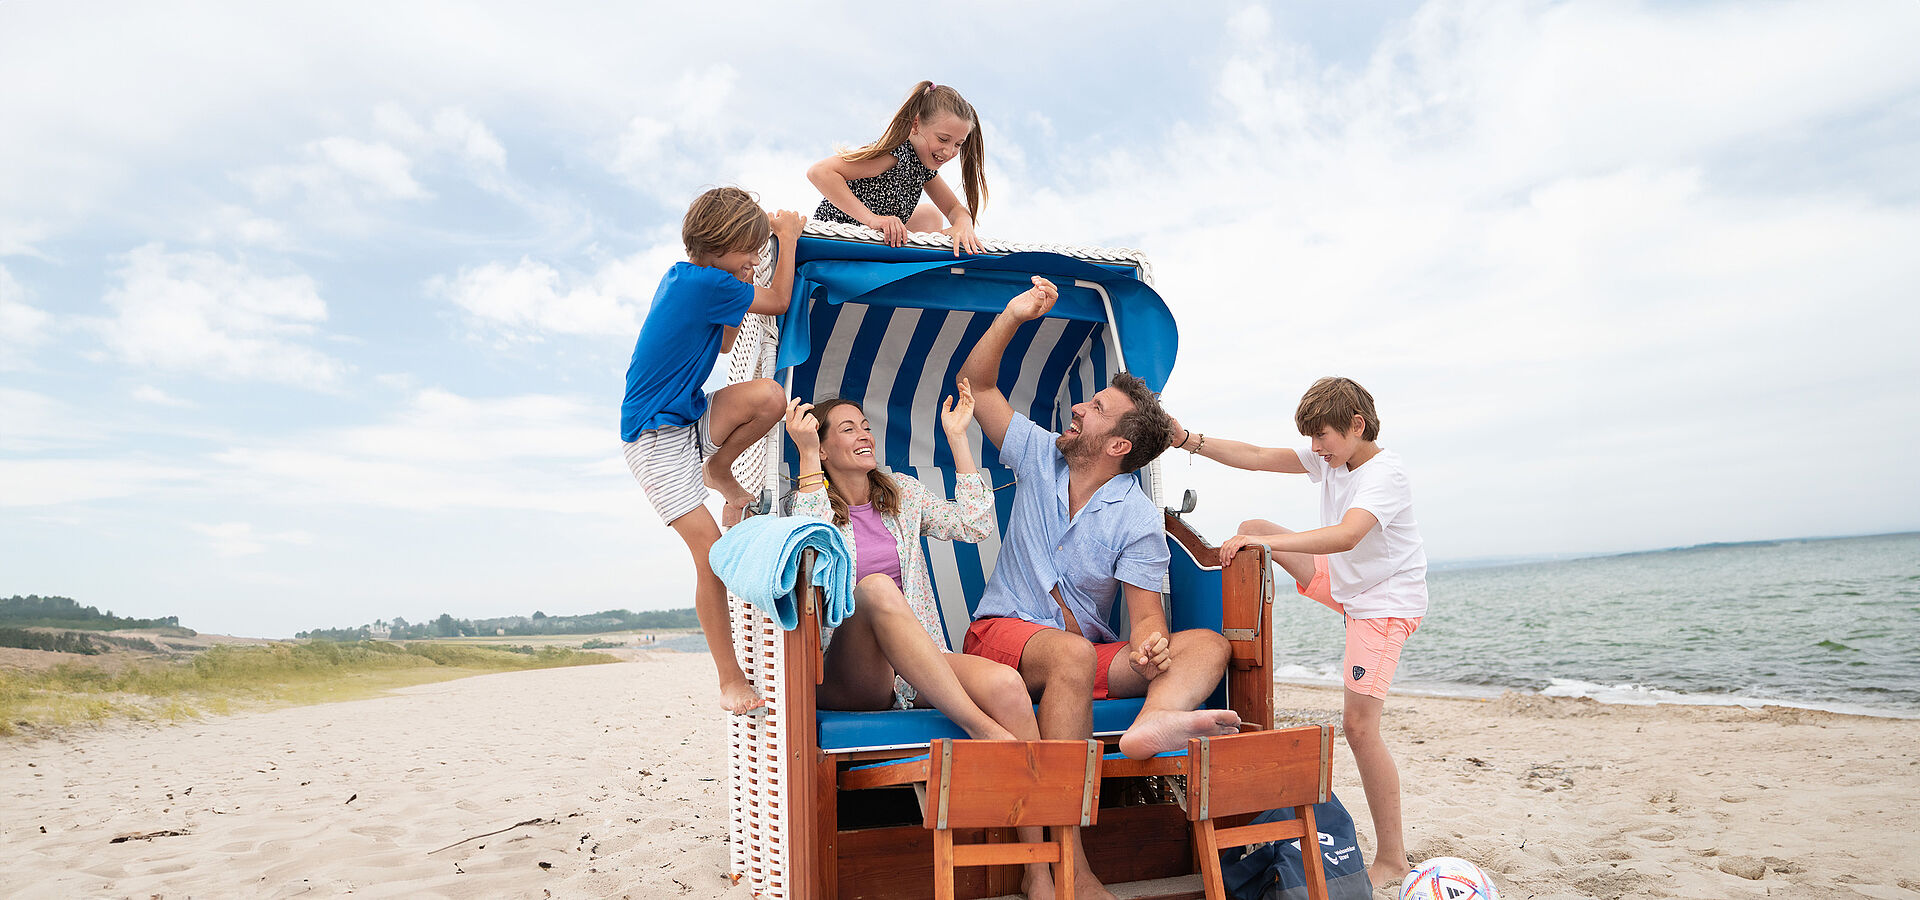 Vacation offer: Wicker Beach Chair Special